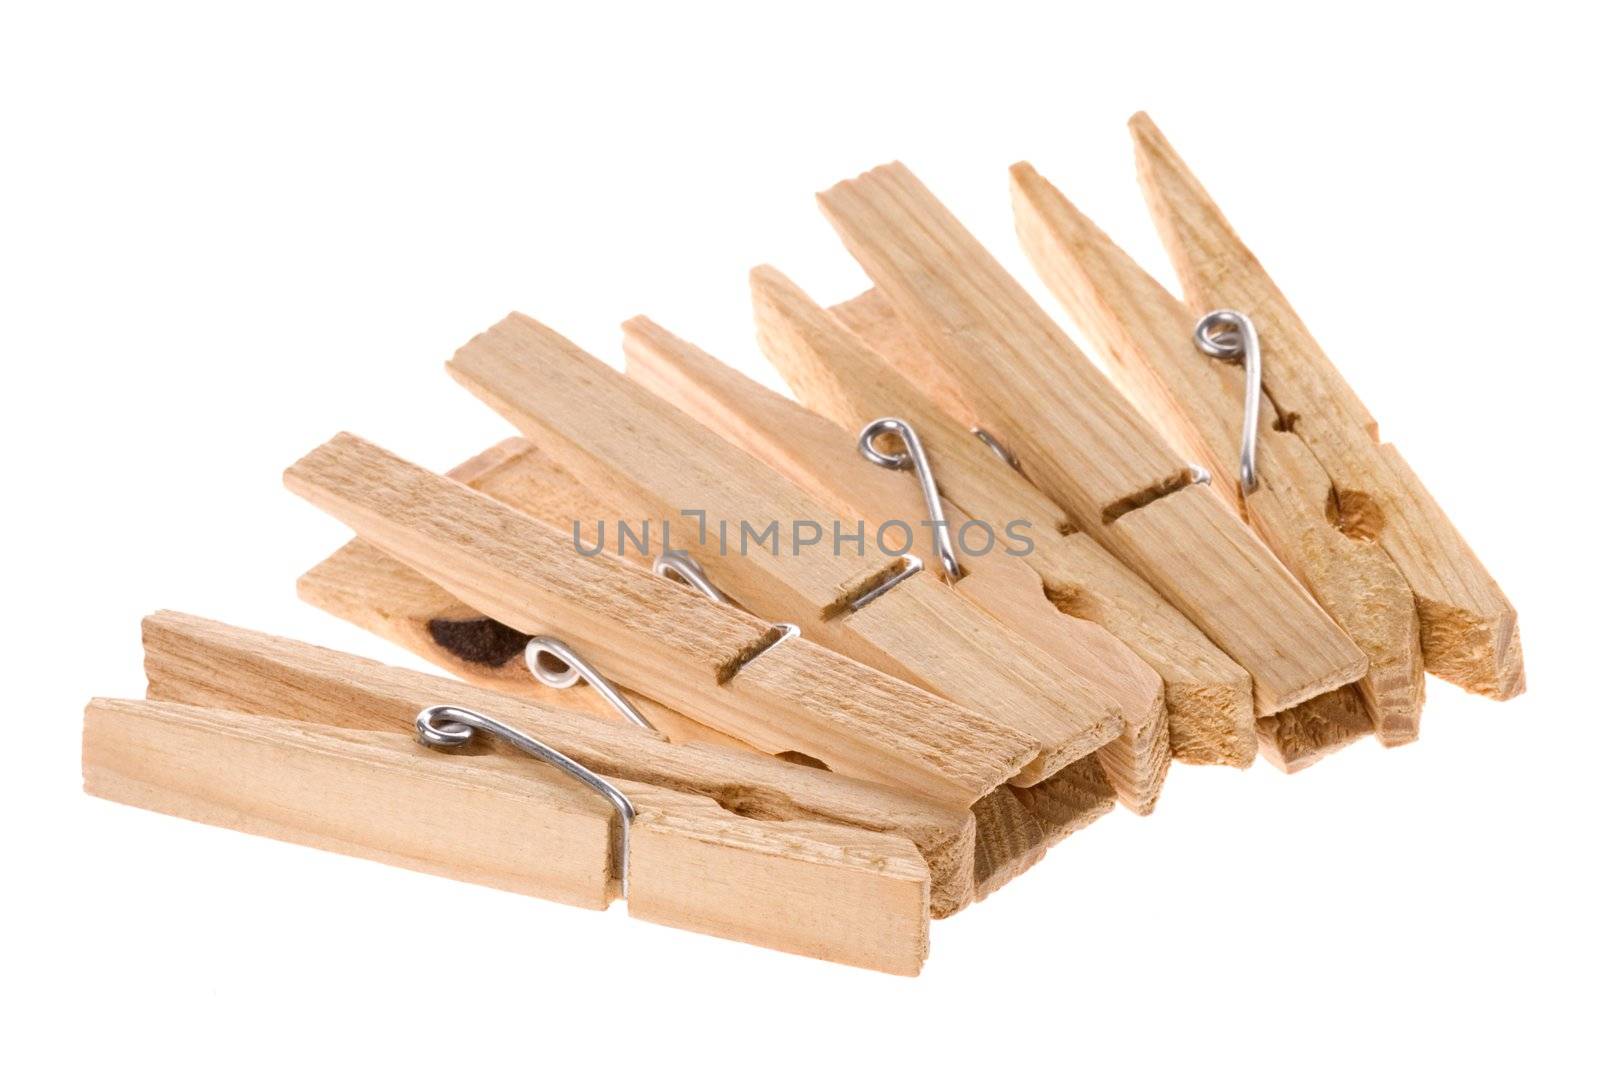 Isolated macro image of wooden laundry pegs.